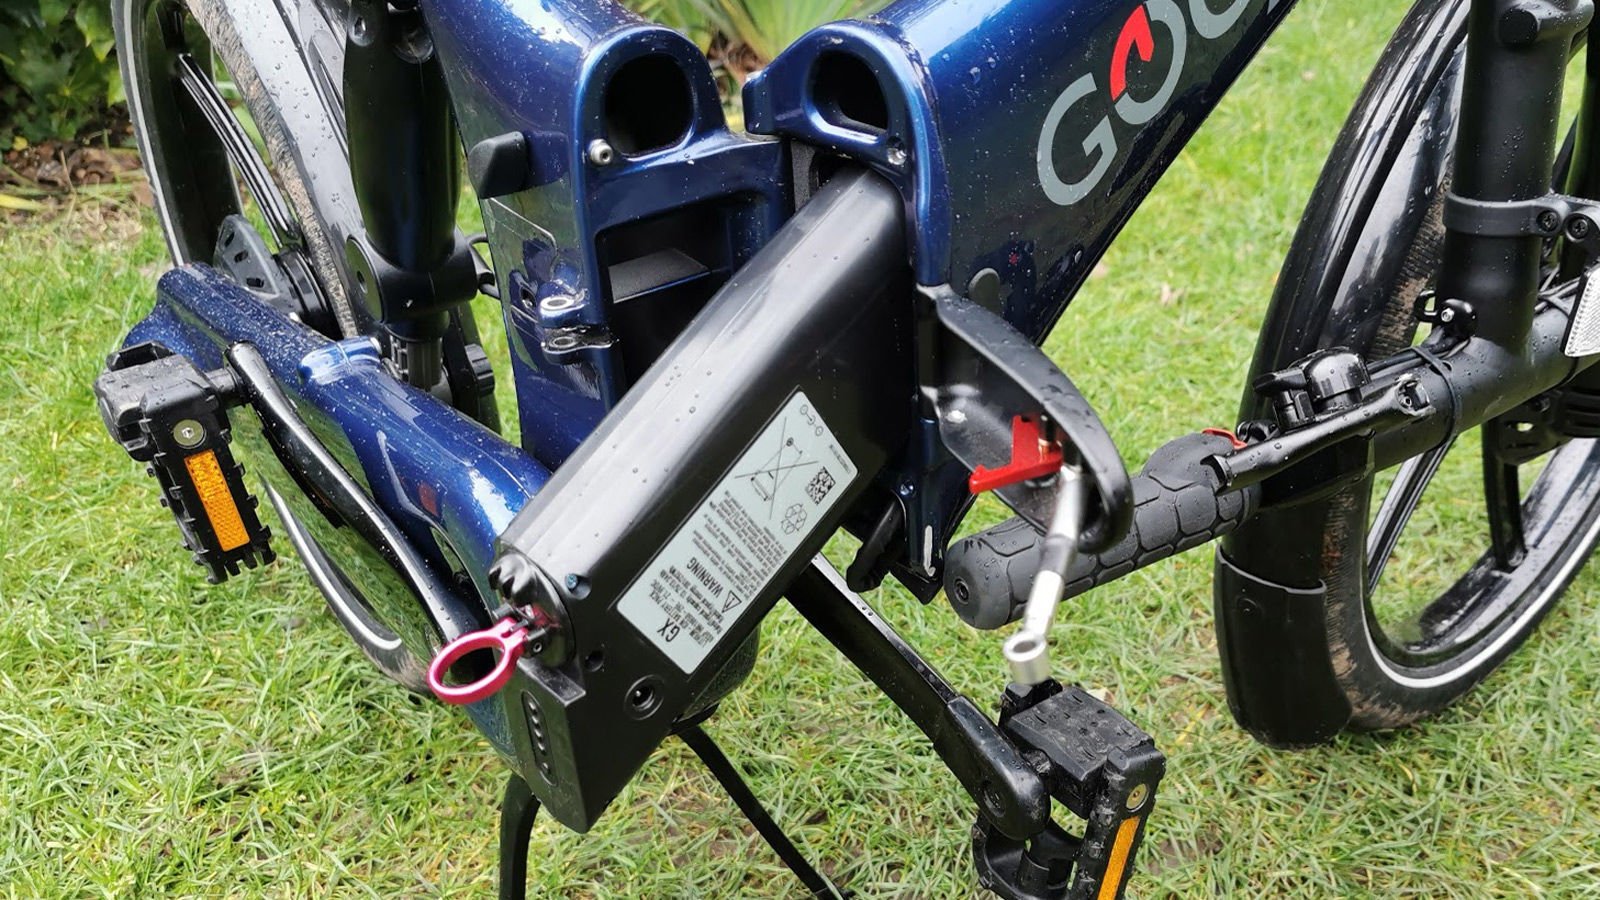 How to maintain an electric bike